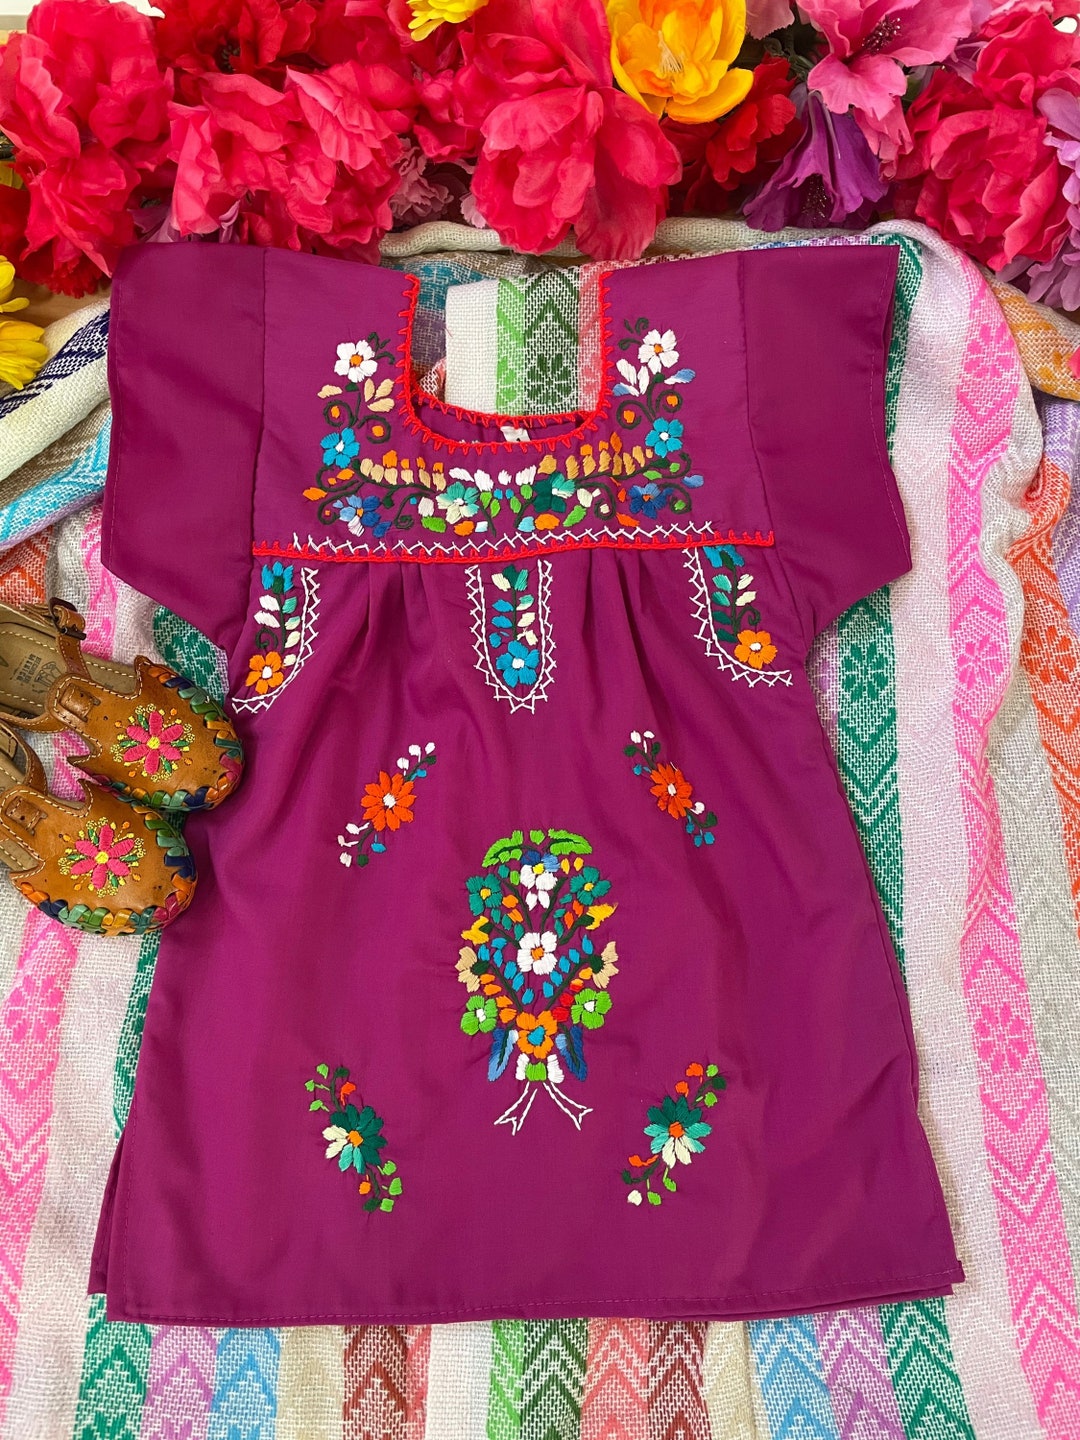 ALL SIZES Babies Toddlers and Girls Mexican Dresses Hand - Etsy